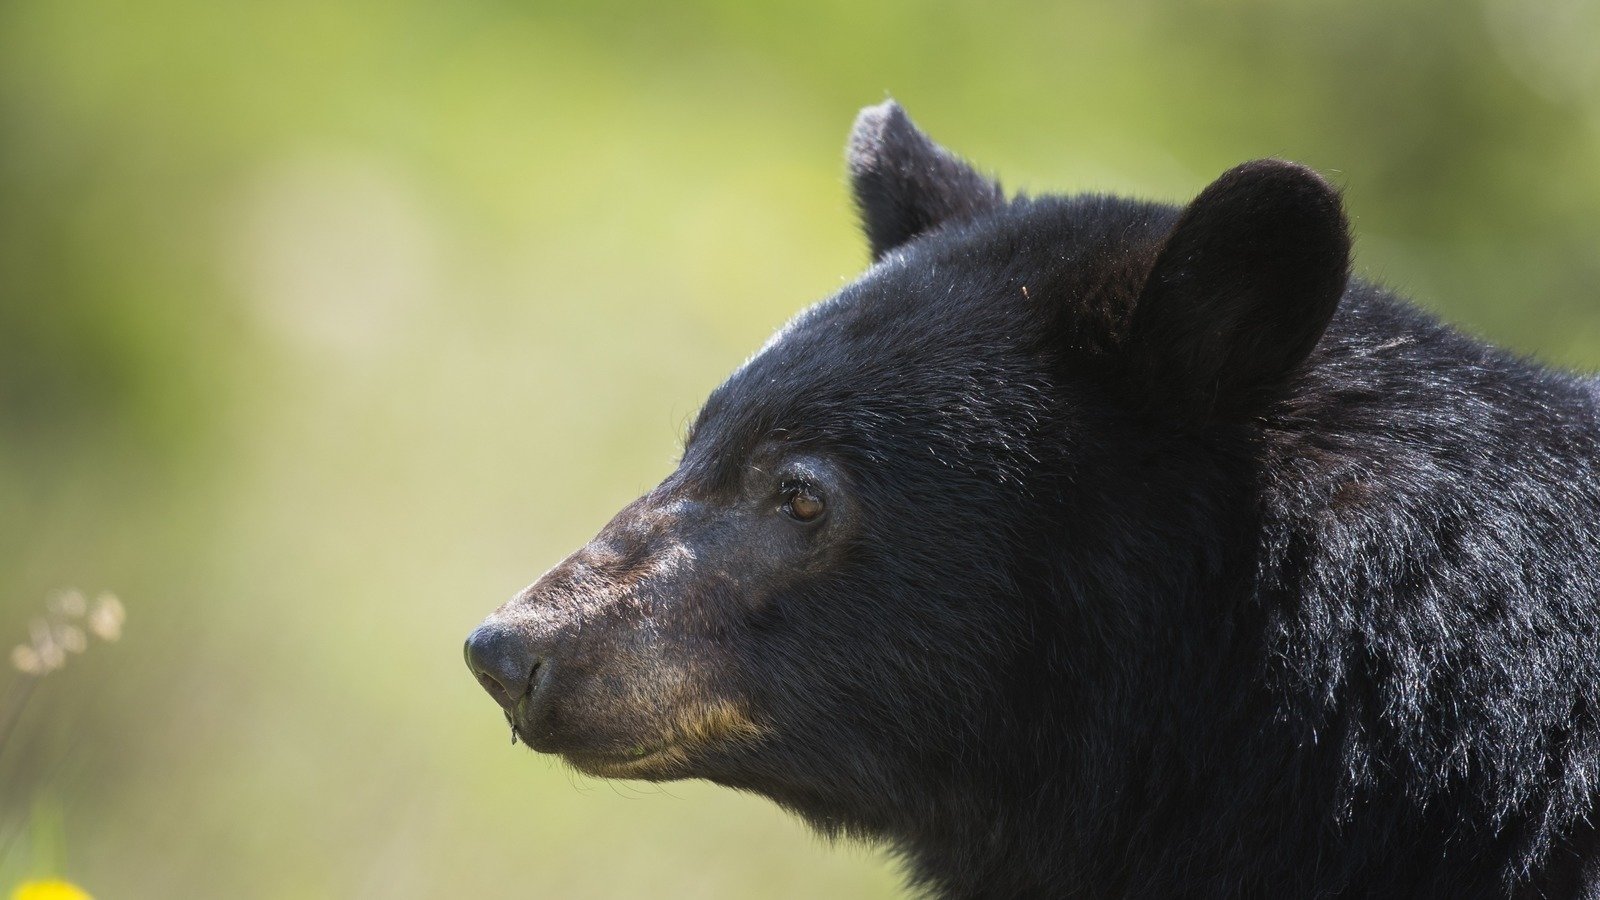 Petition · URGENT: Help Permanently Ban Spring Bear Hunting In Washington! · Change.org